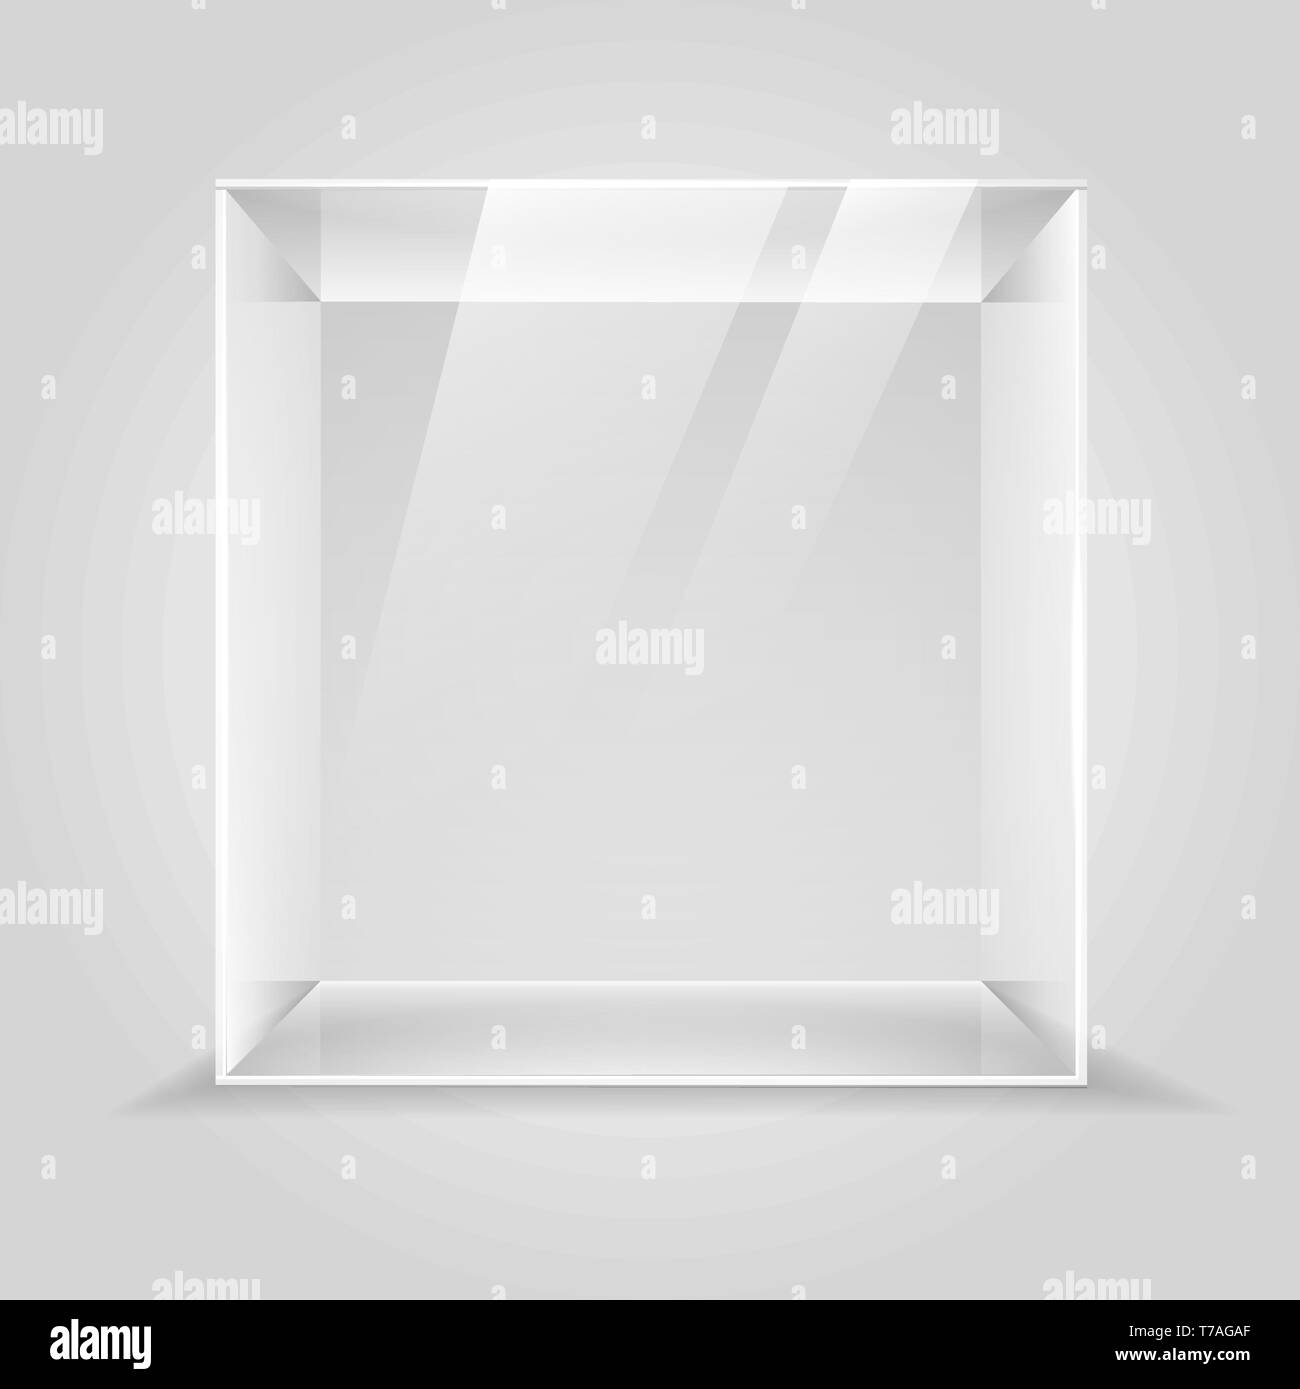 Glass showcase. Empty glass display box, 3d museum lighting cube illustration, transparent product shop or gallery presenting podium Stock Vector